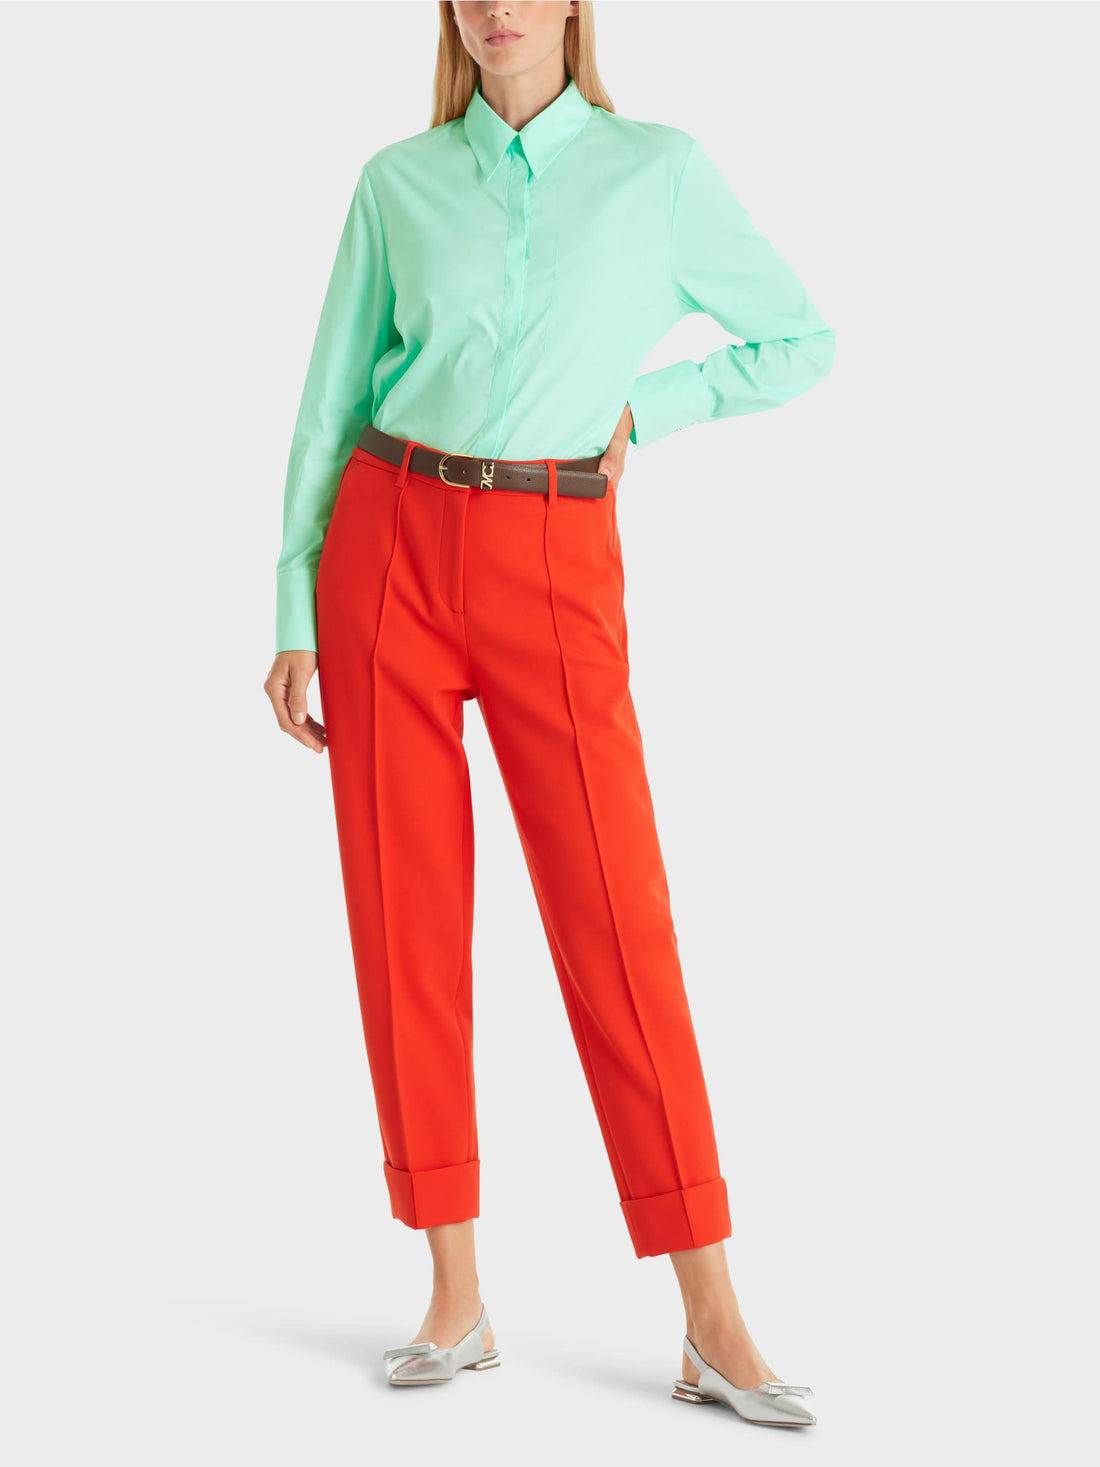 Fordon Pants With Pleat And Cuffs_WC 81.13 W22_223_01